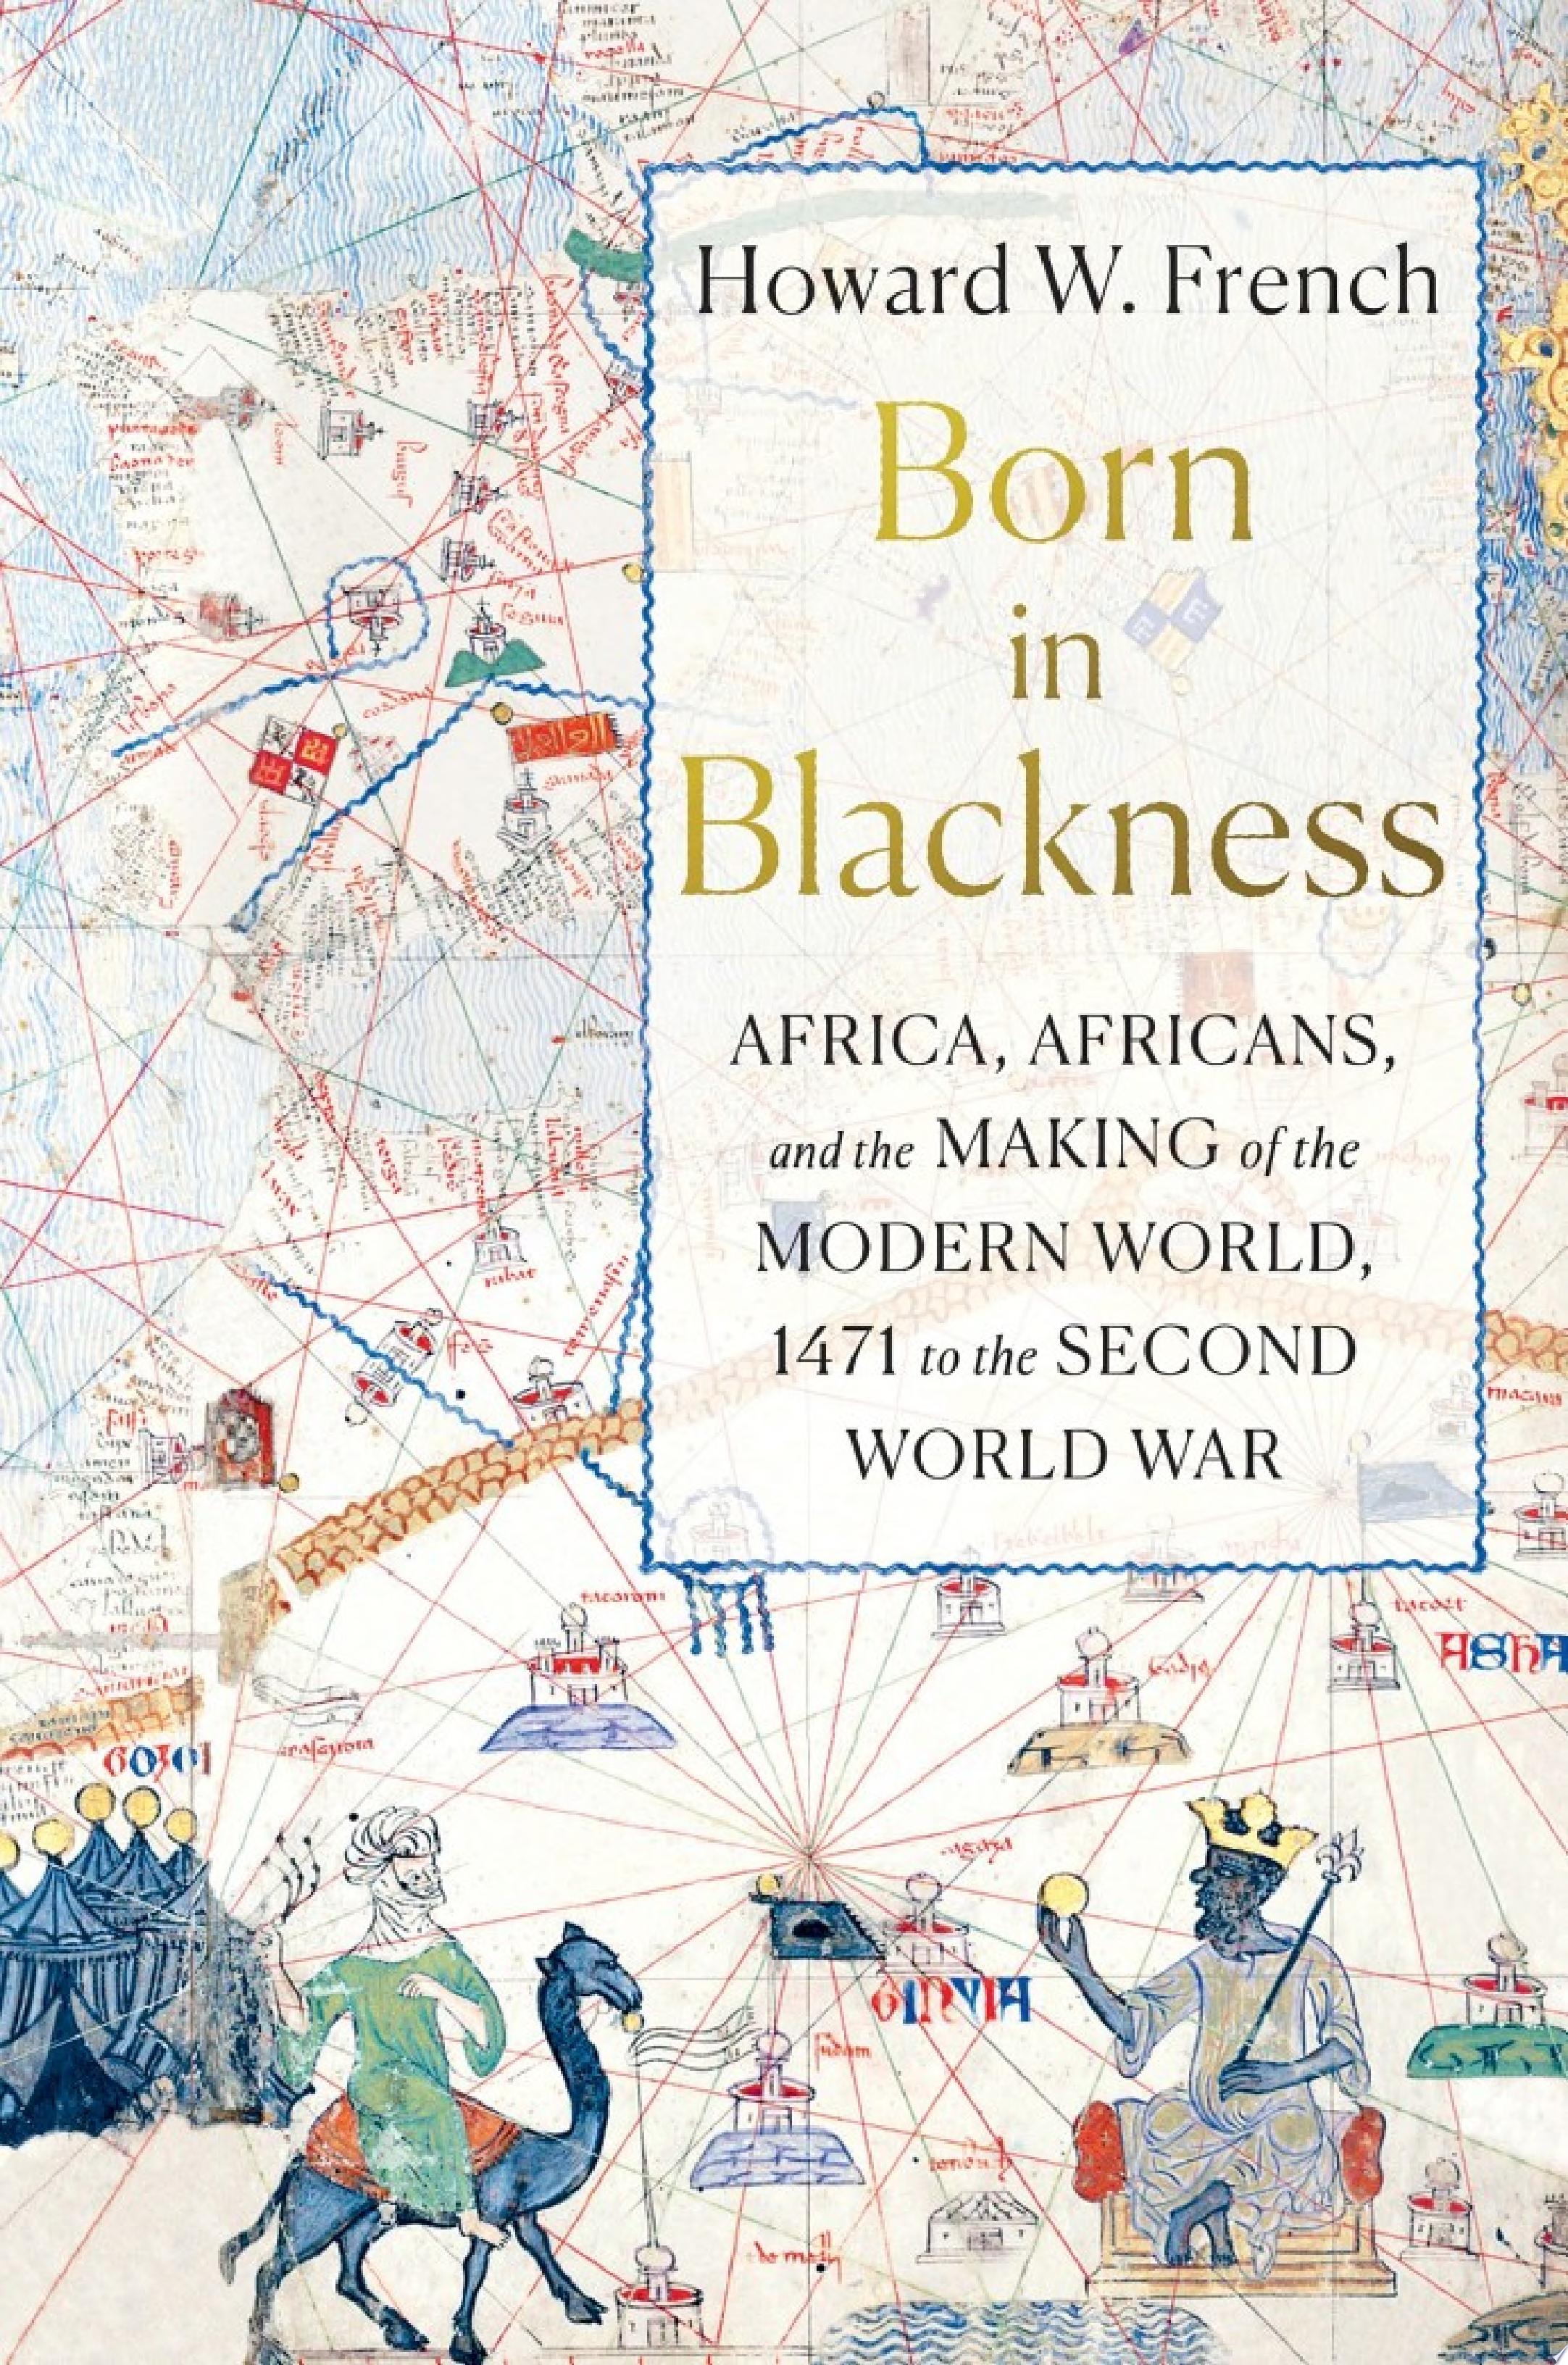 Image for "Born in Blackness: Africa, Africans, and the Making of the Modern World, 1471 to the Second World War"